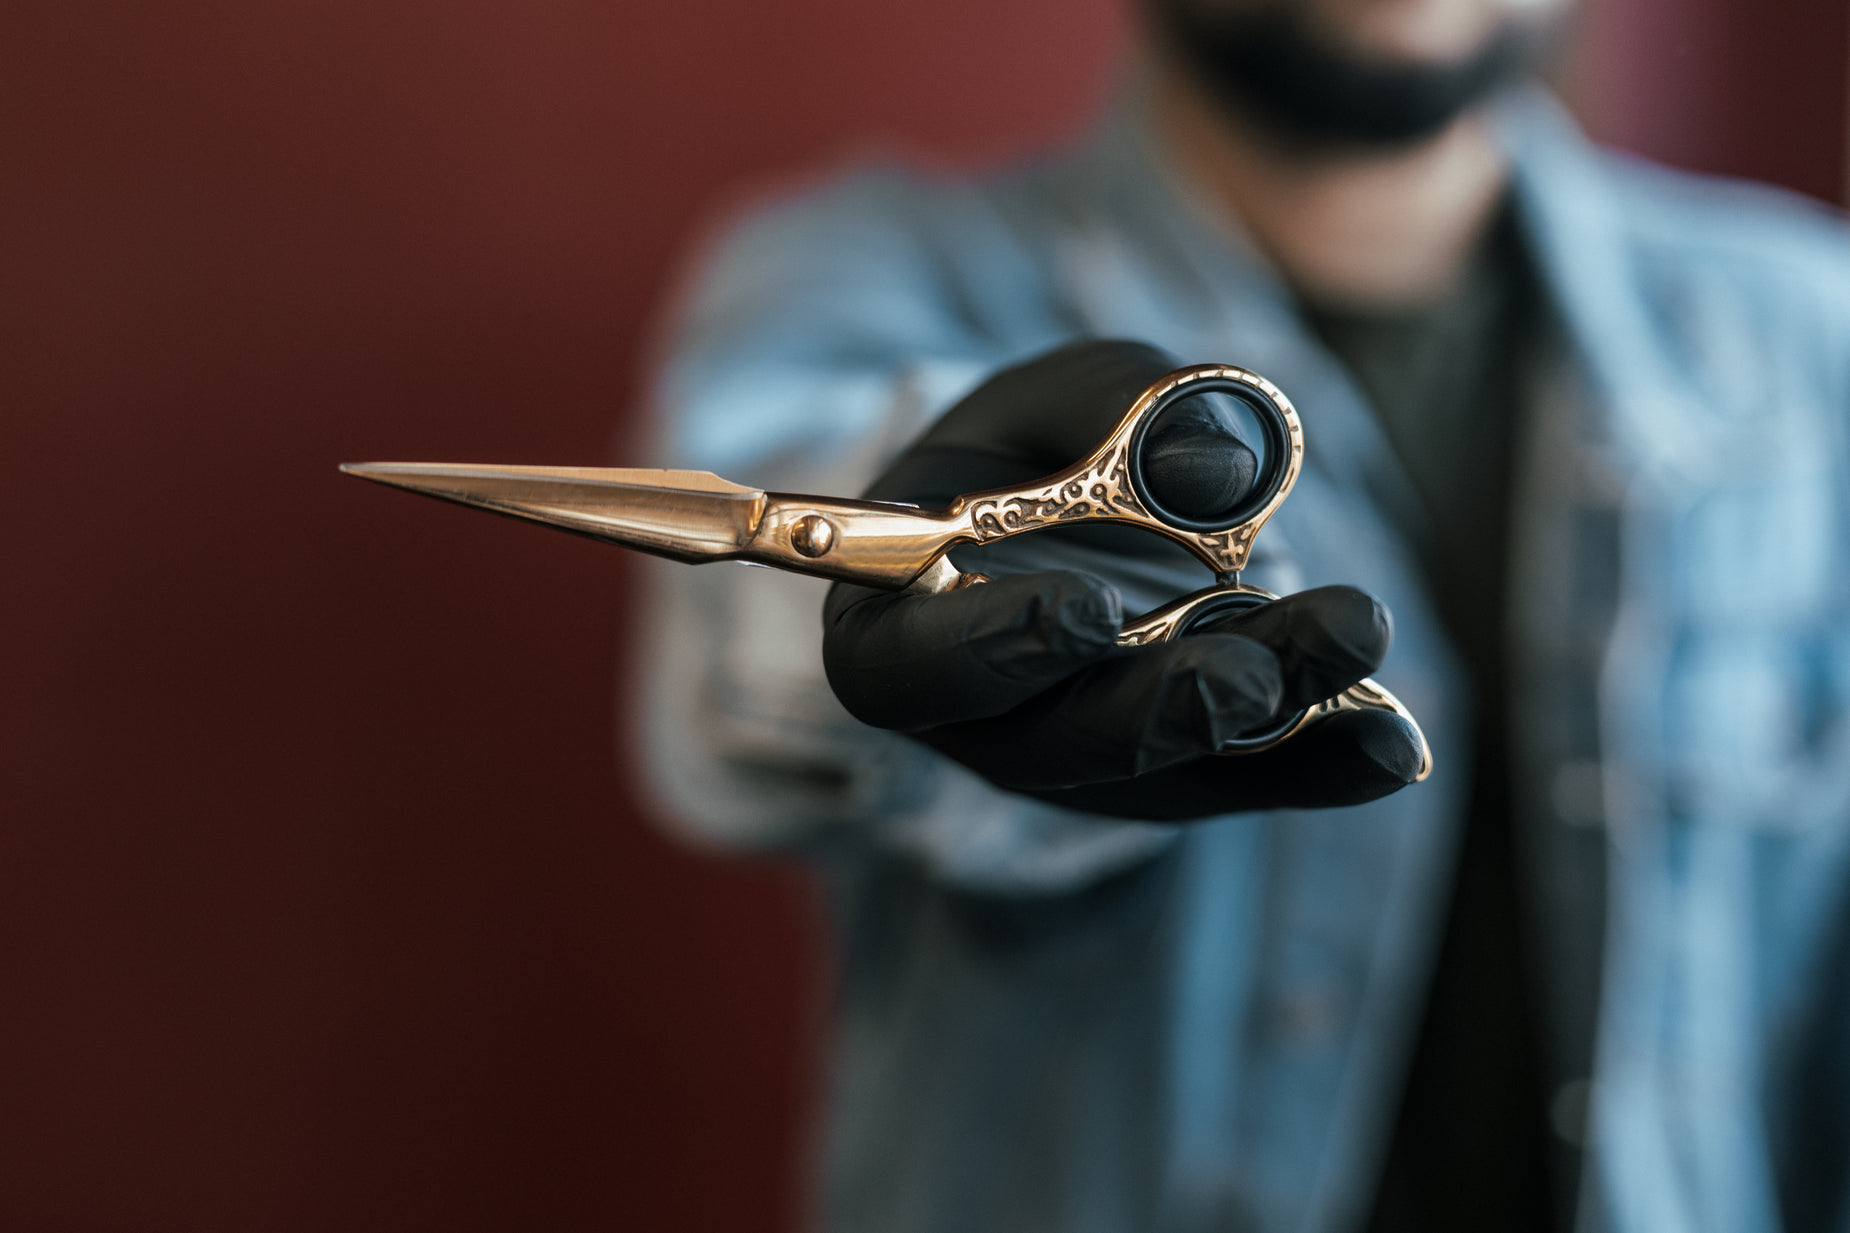 a person wearing black gloves holding scissors in their hands